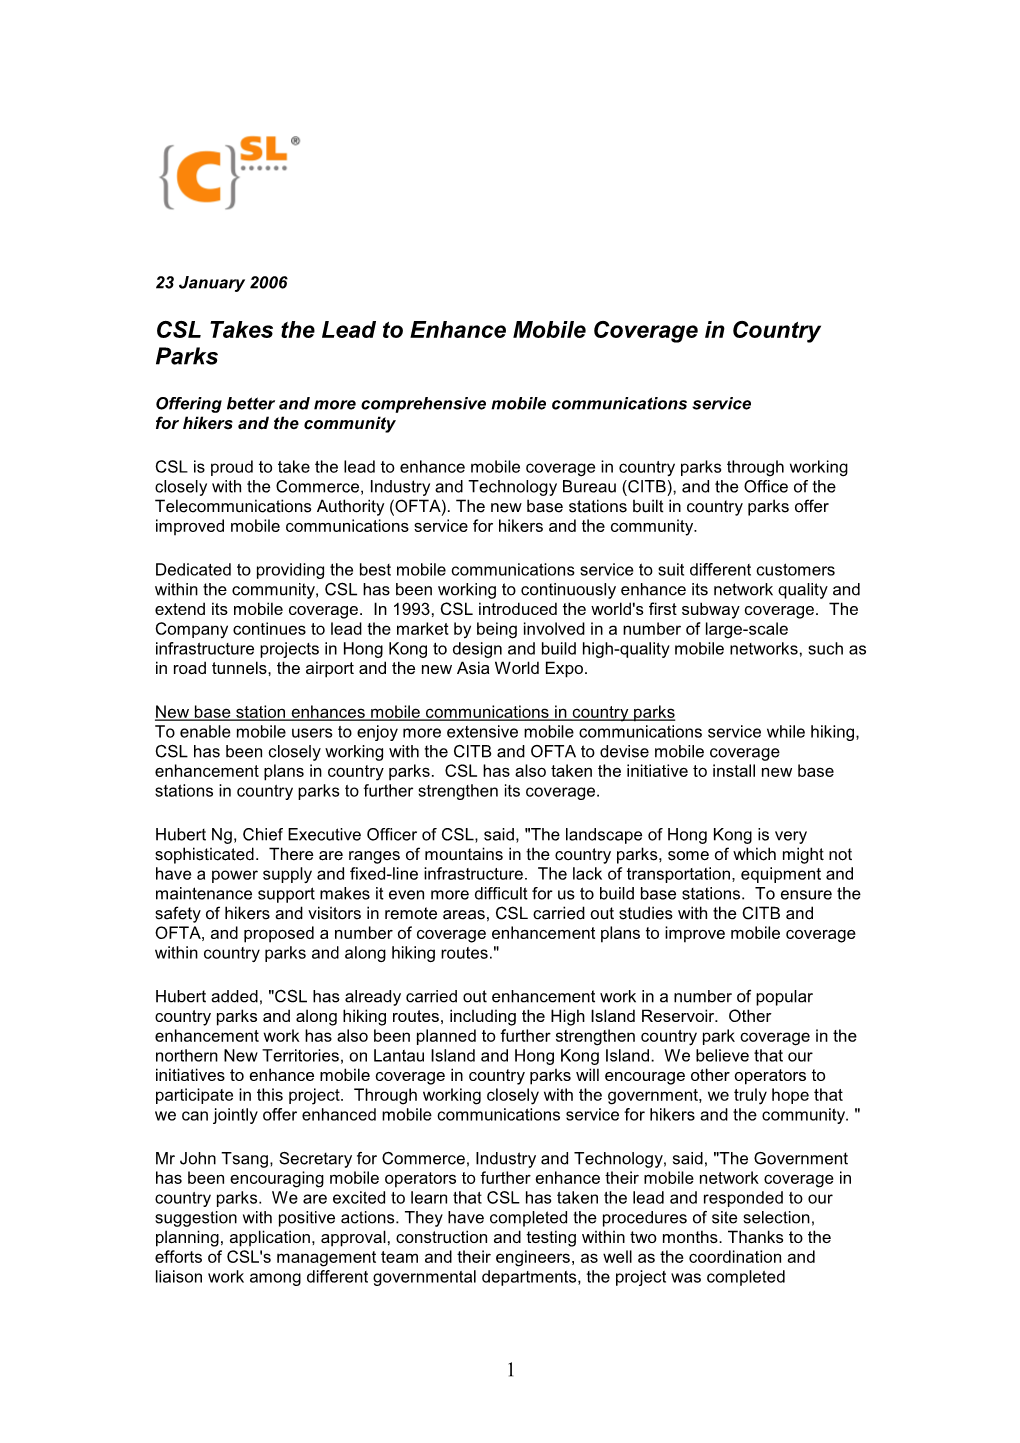 CSL Takes the Lead to Enhance Mobile Coverage in Country Parks